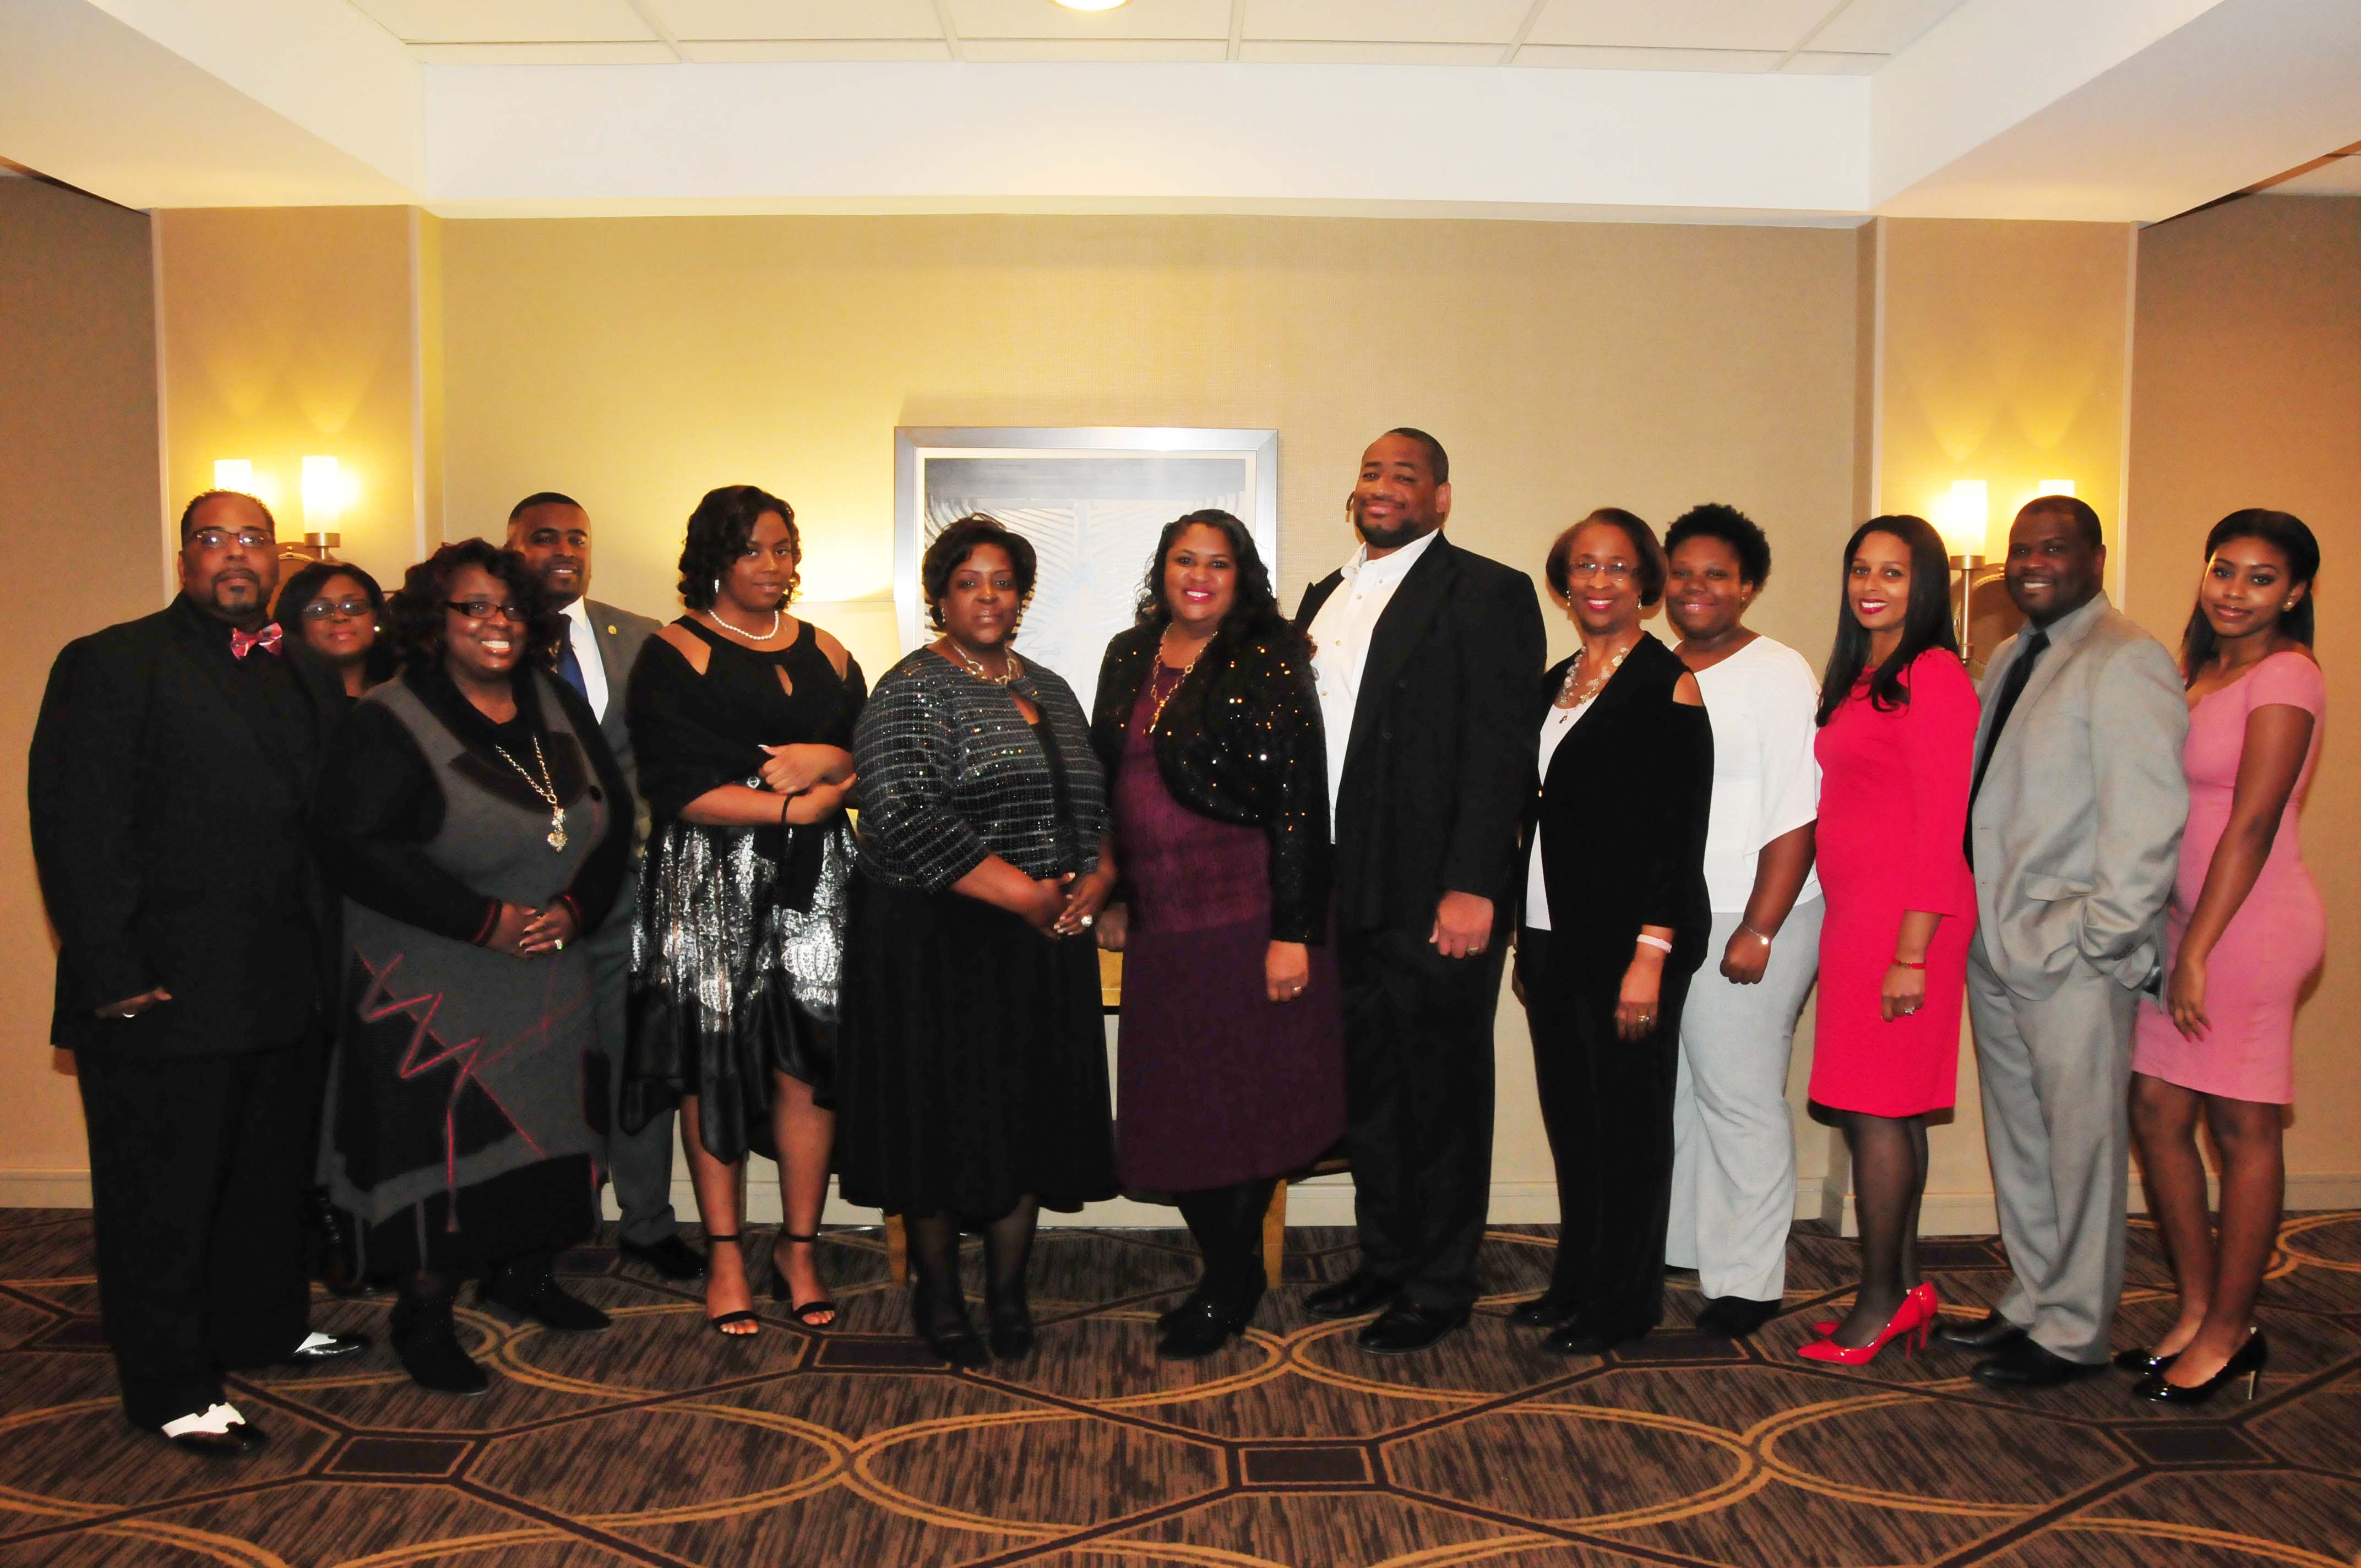 DSU's Early College High School staff and board members gathered at the Doubletree Hotel to receive an Education Award from the Wilmington Branch of the NAACP.